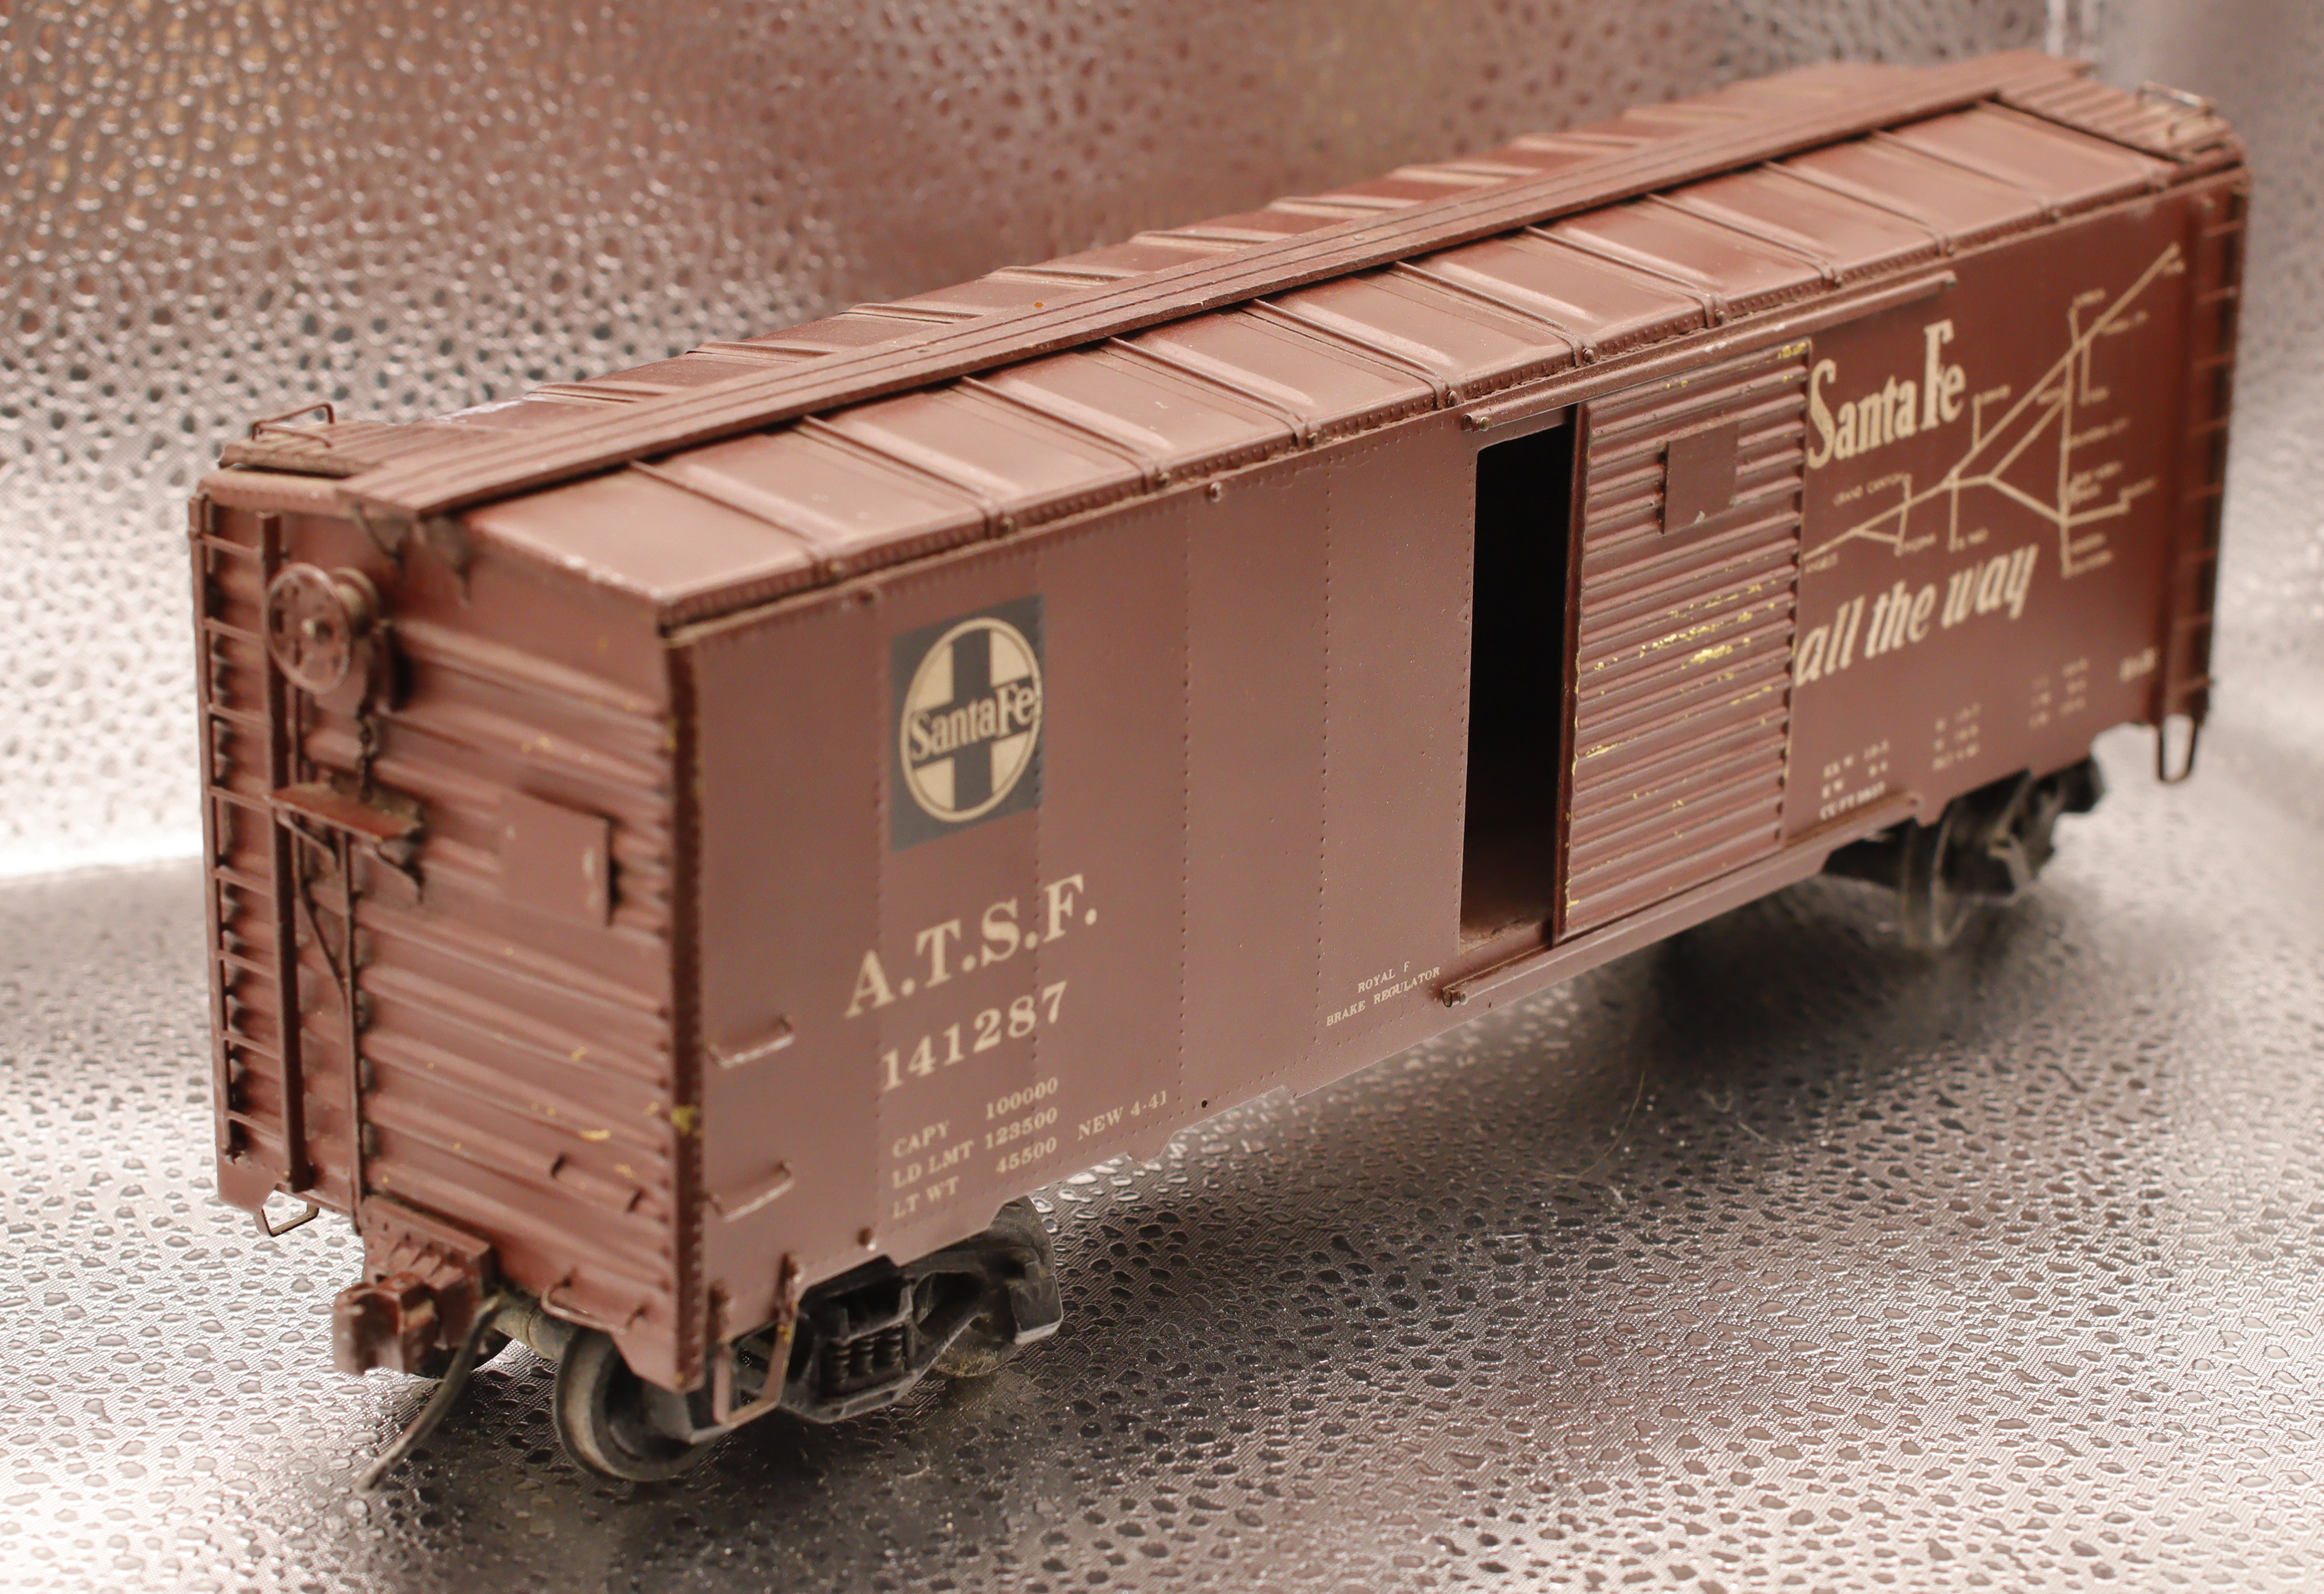 1st view of the unbranded ATSF Santa Fe Boxcar #141287 in my O-scale Collection